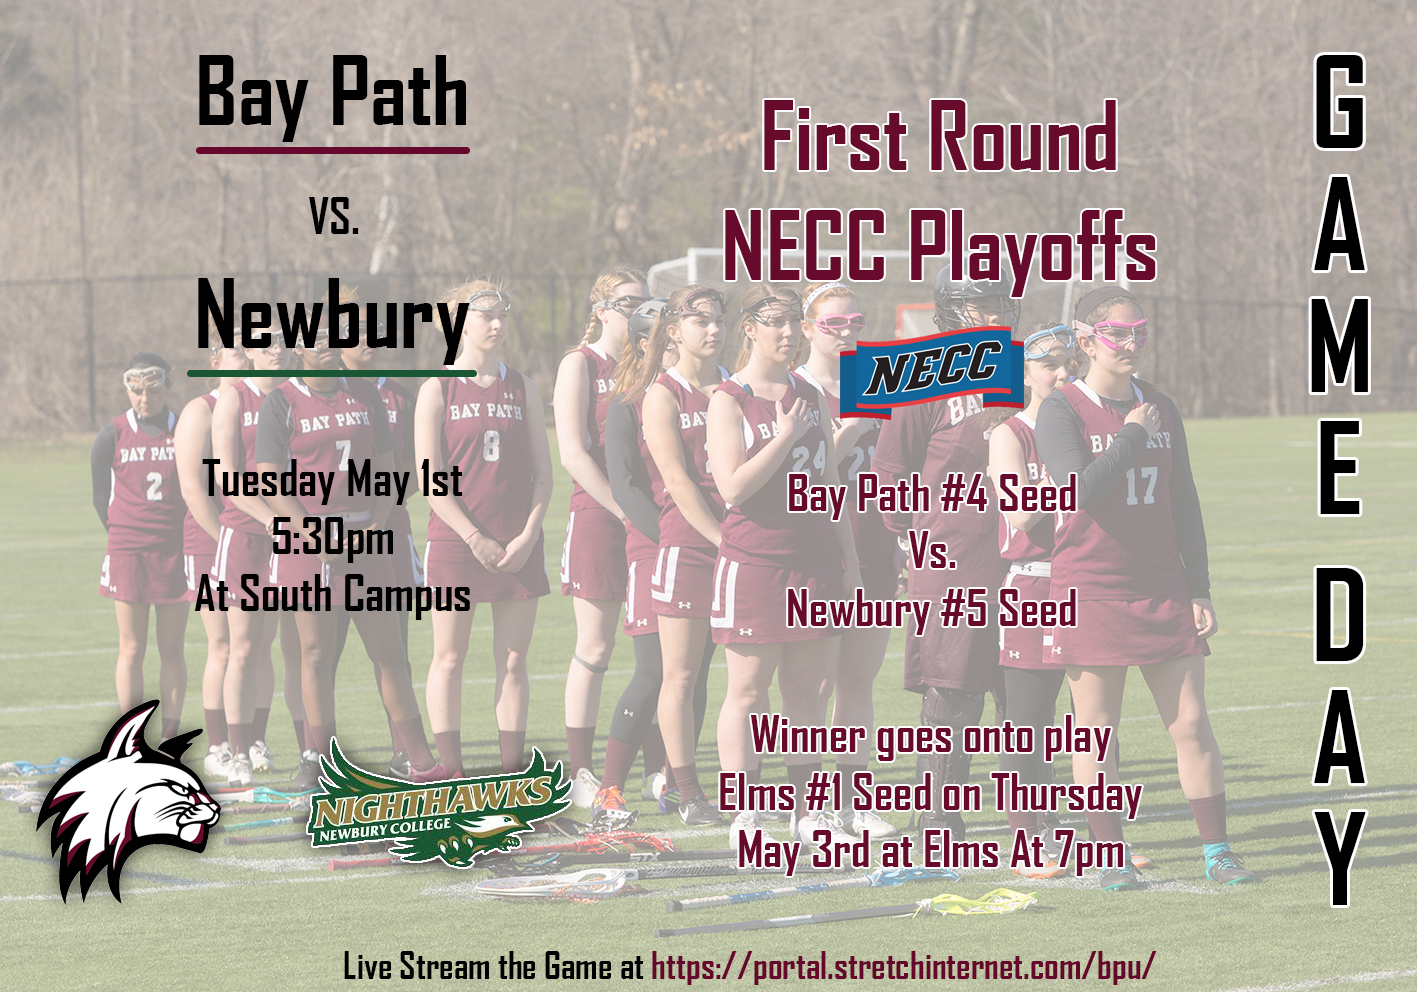 Bay Path "Wildcats" clinch #4 seed in NECC Lacrosse Tournament